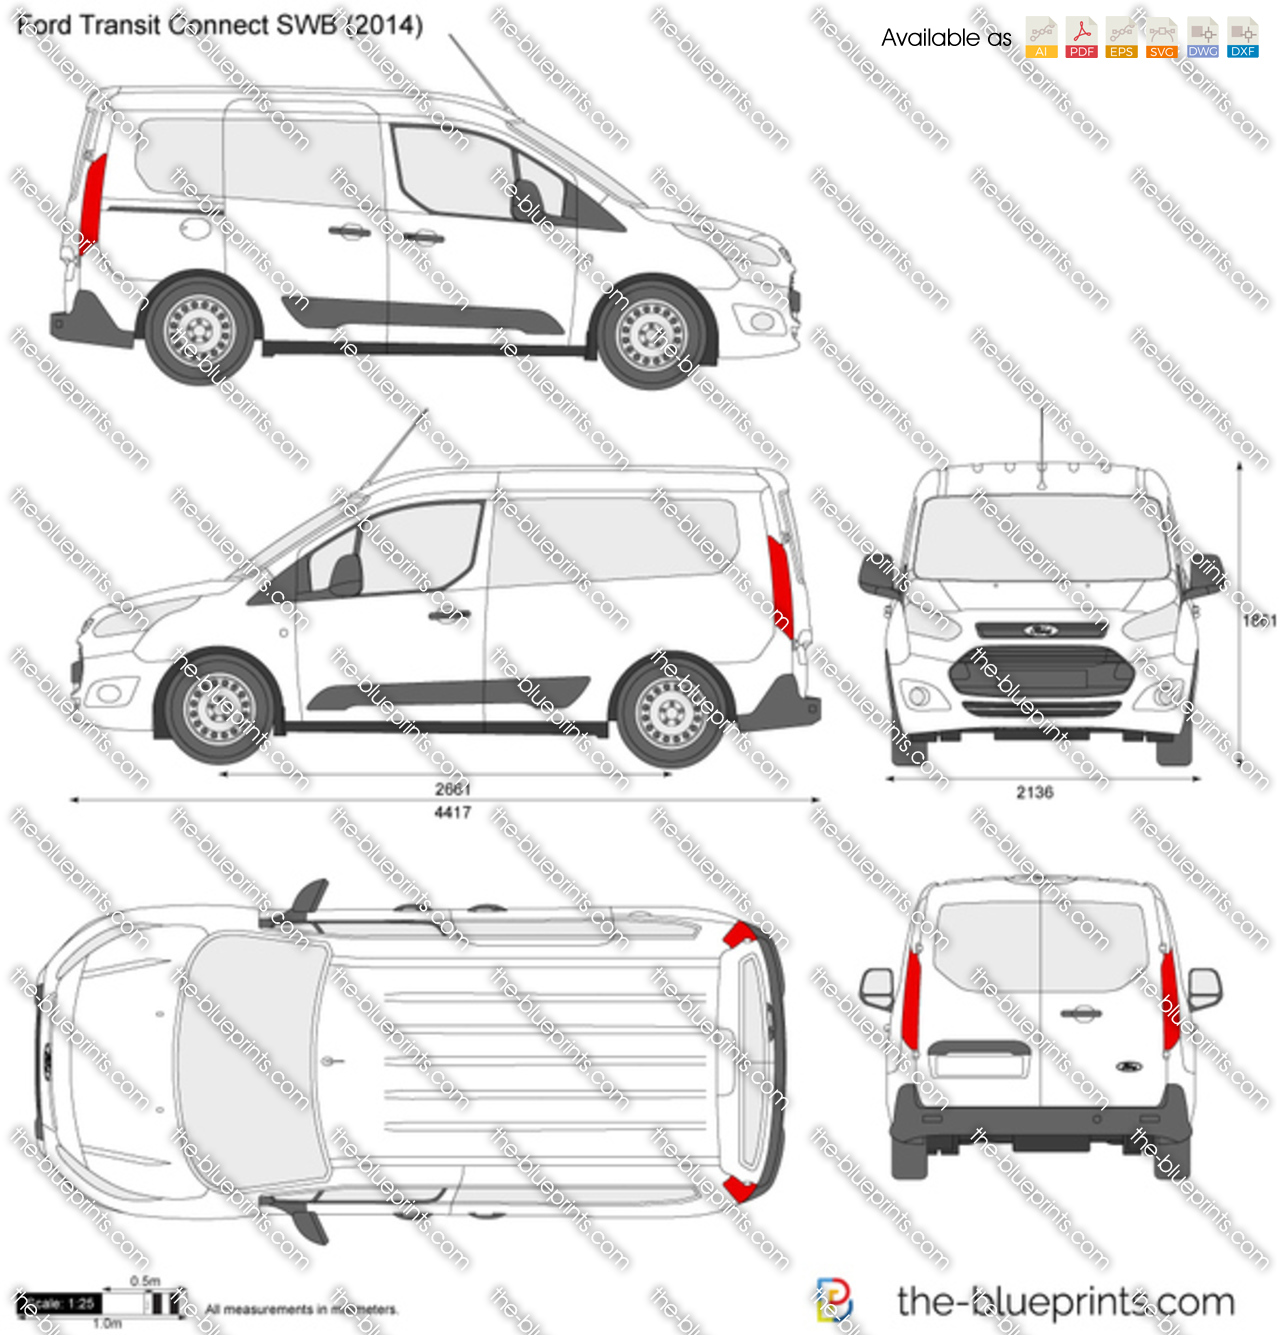 Ford Transit Connect SWB